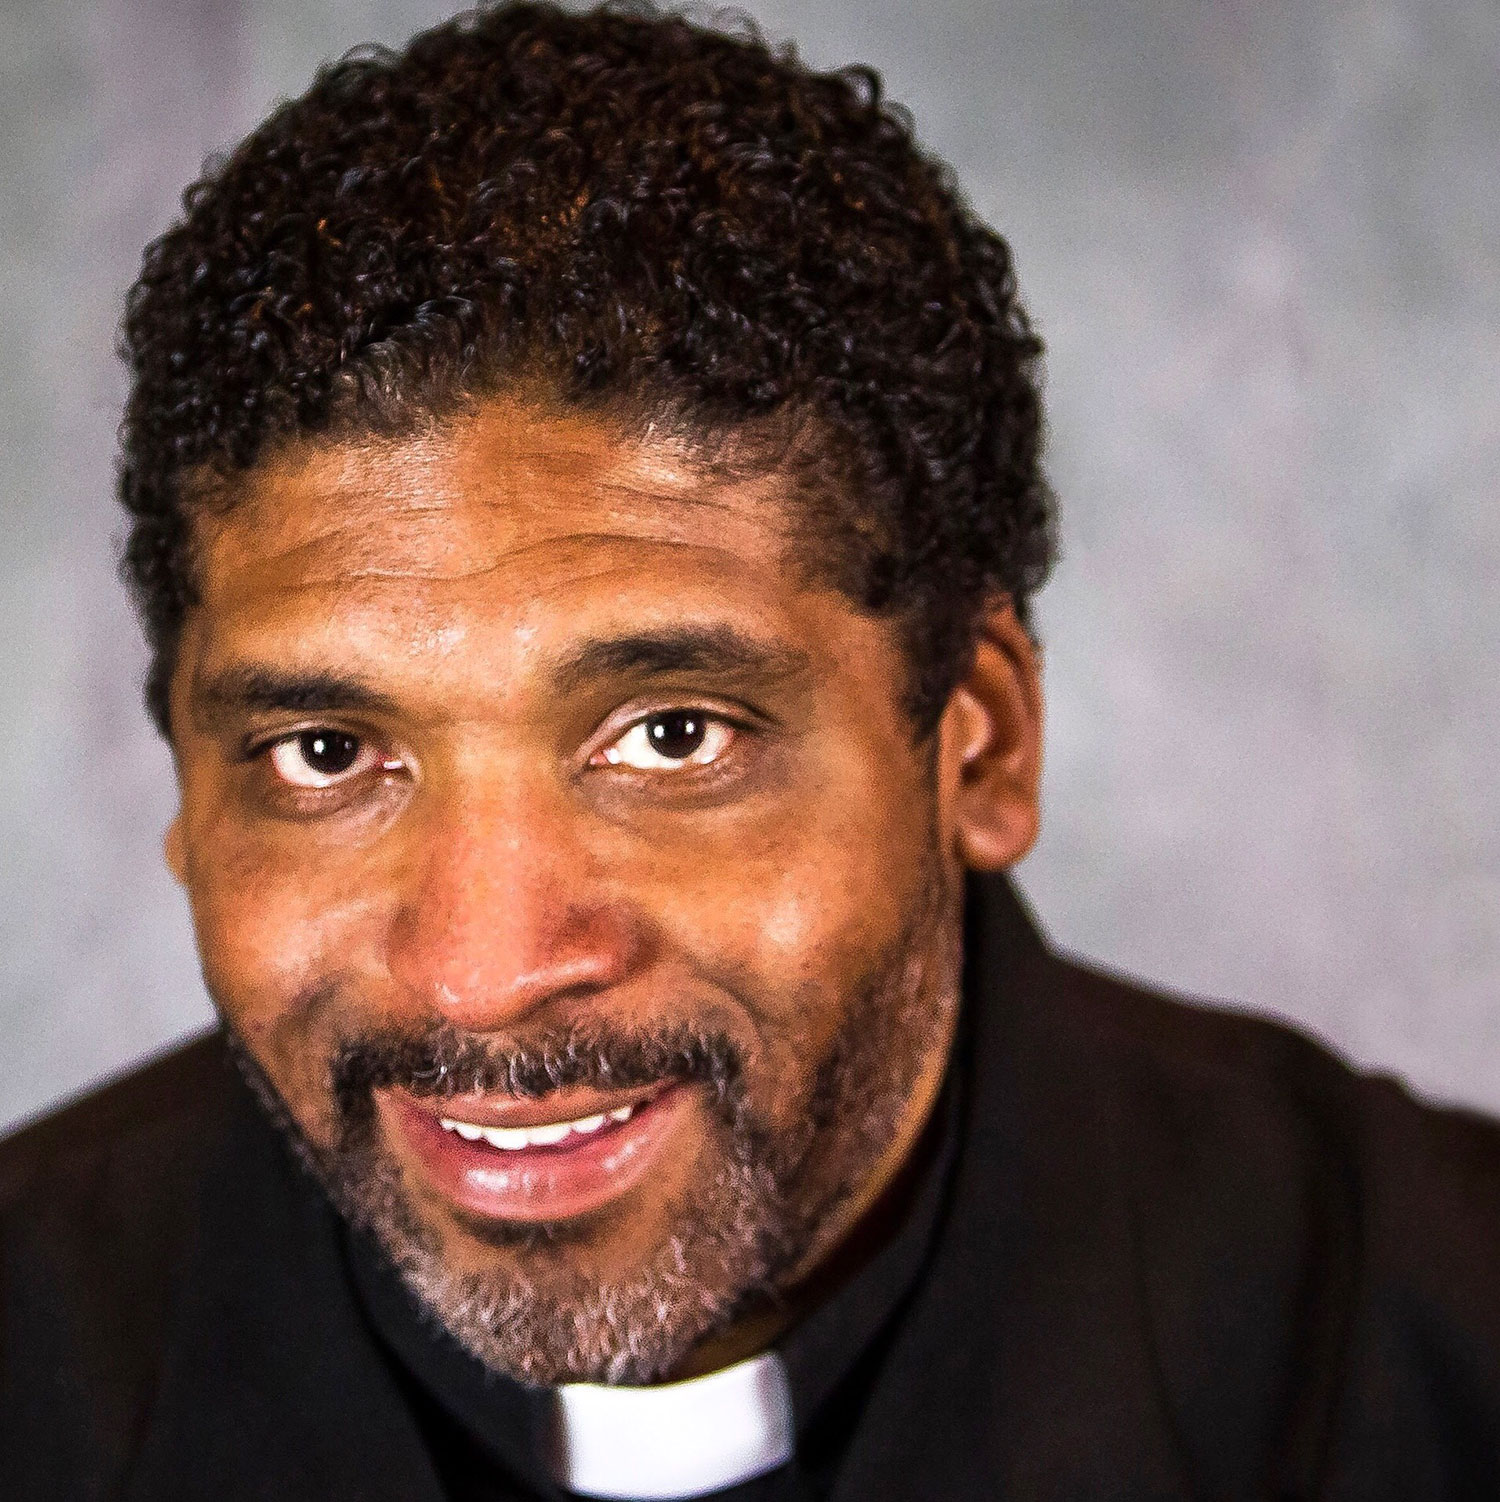 Rev. Dr. William J. Barber, II, President, Repairers of the Breach, National Co-Chair of the 2019 Poor People's Campaign